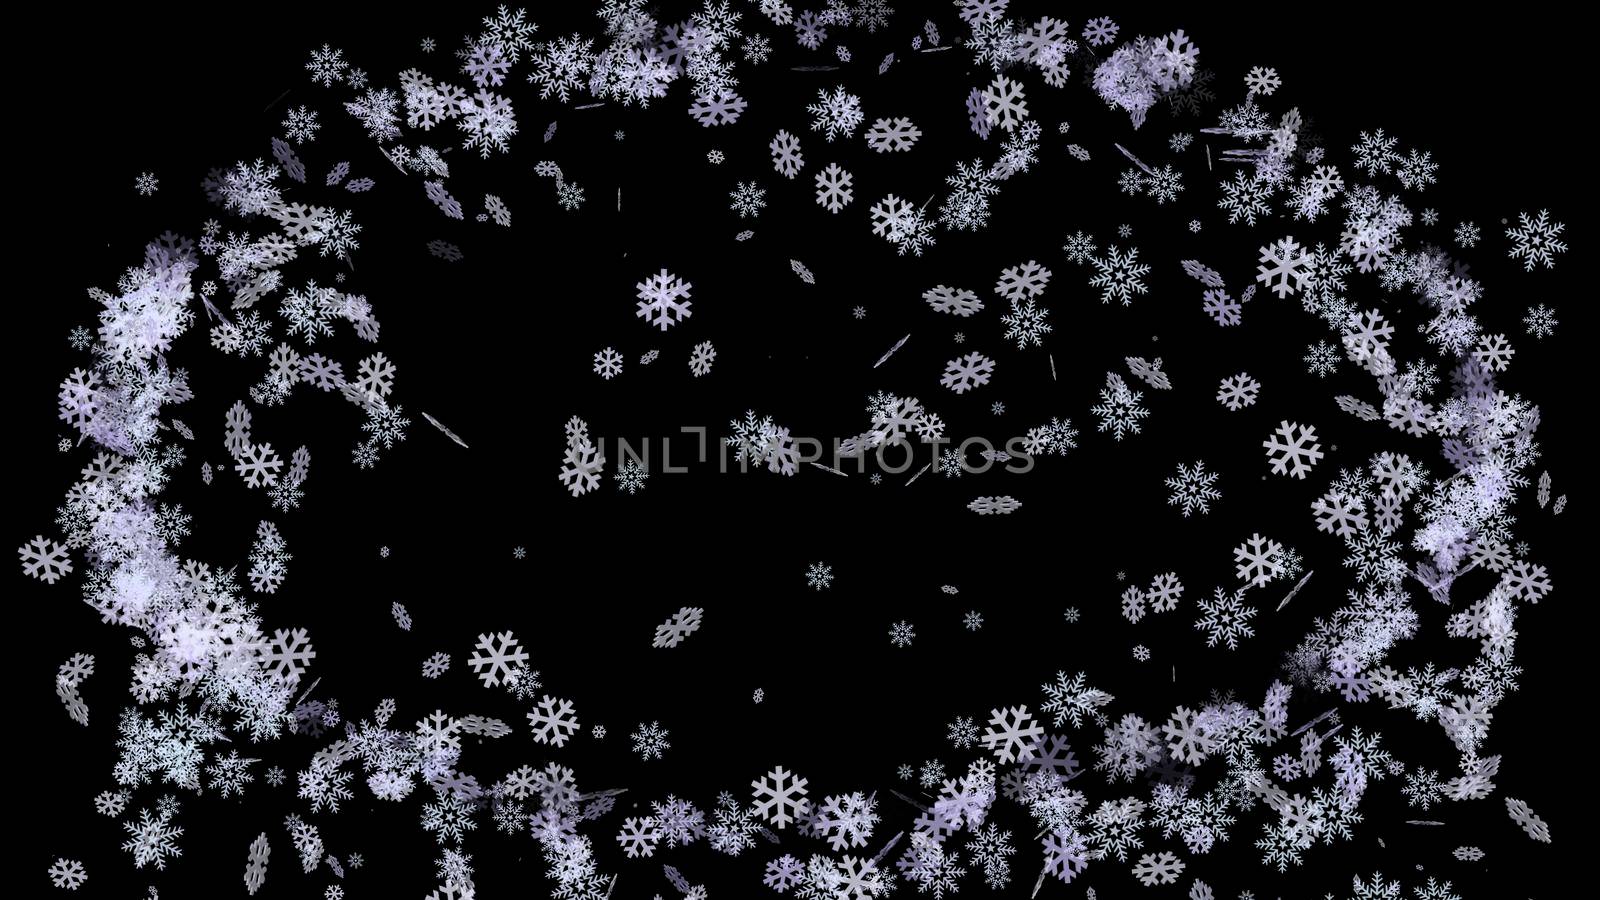 Abstract black background with a frame of white snowflakes